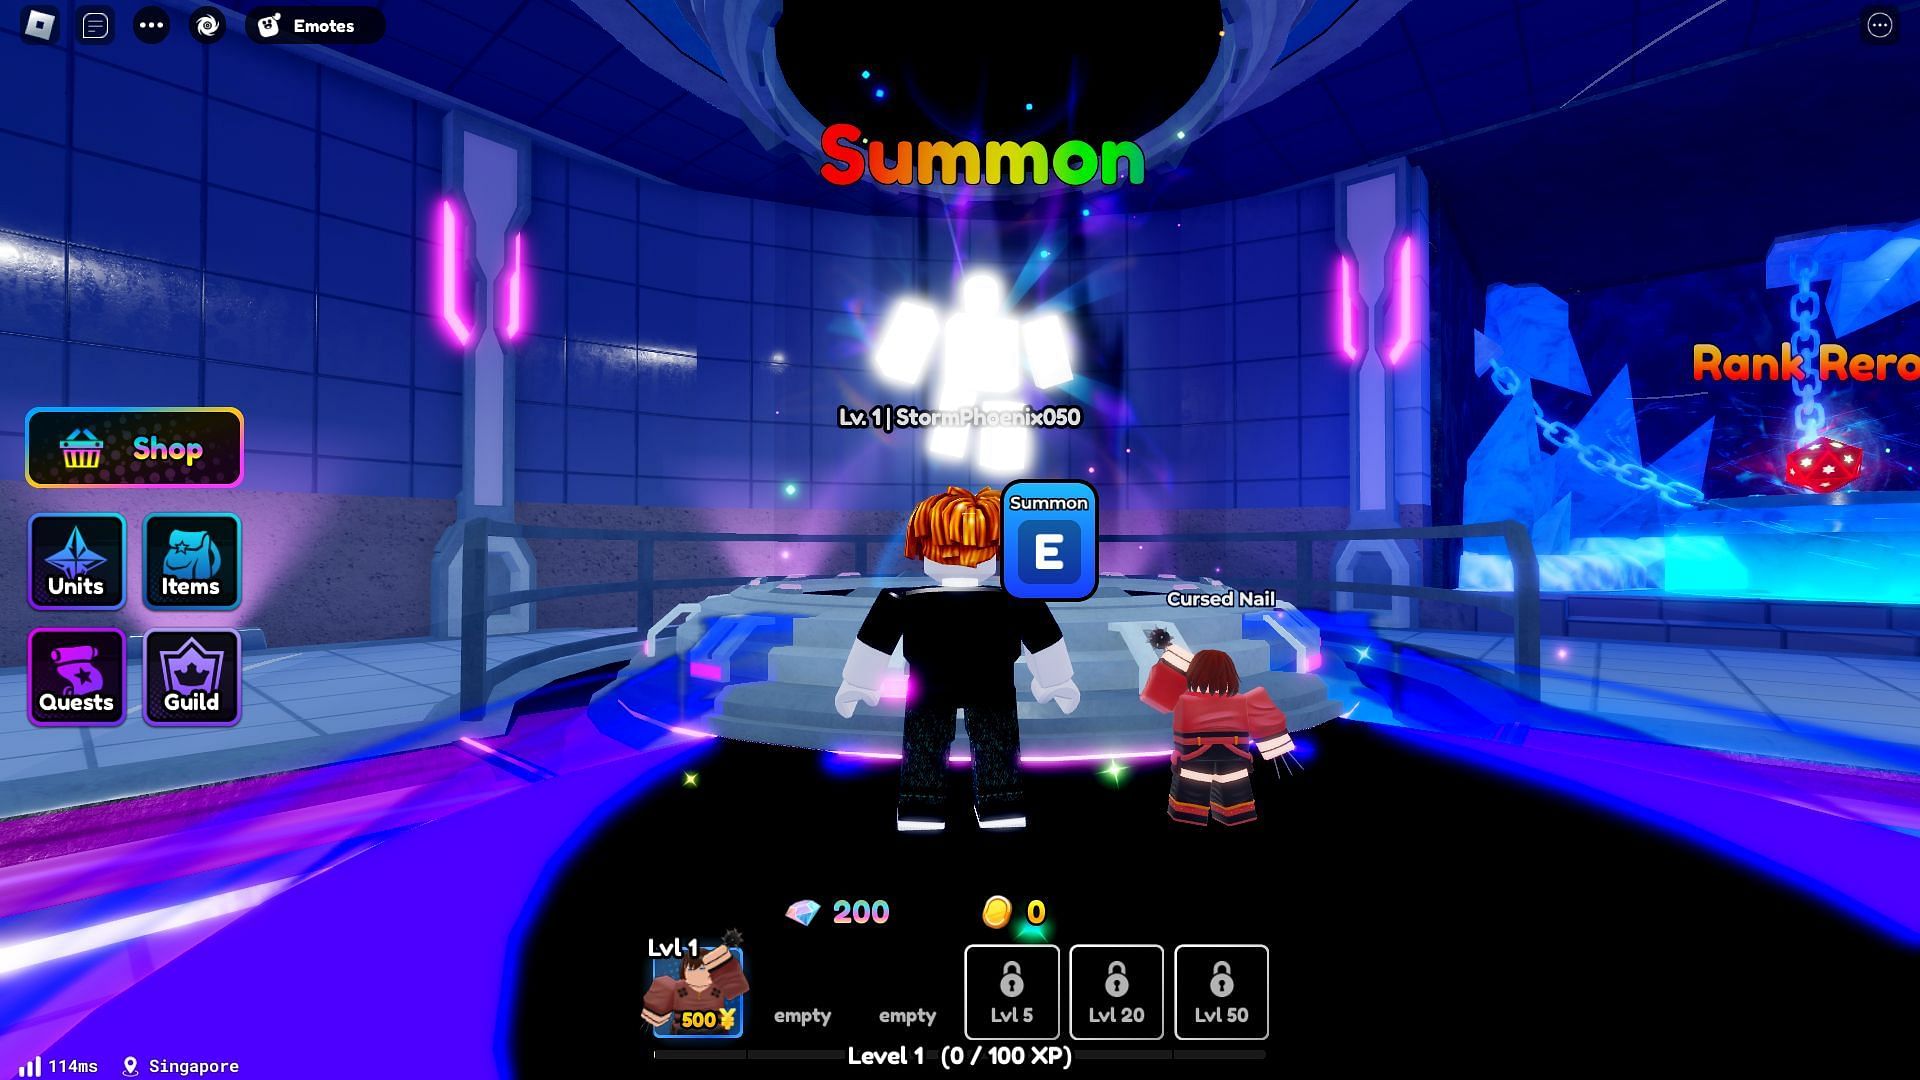 Flame Dragon King can be obtained via Summon (Image via Roblox)